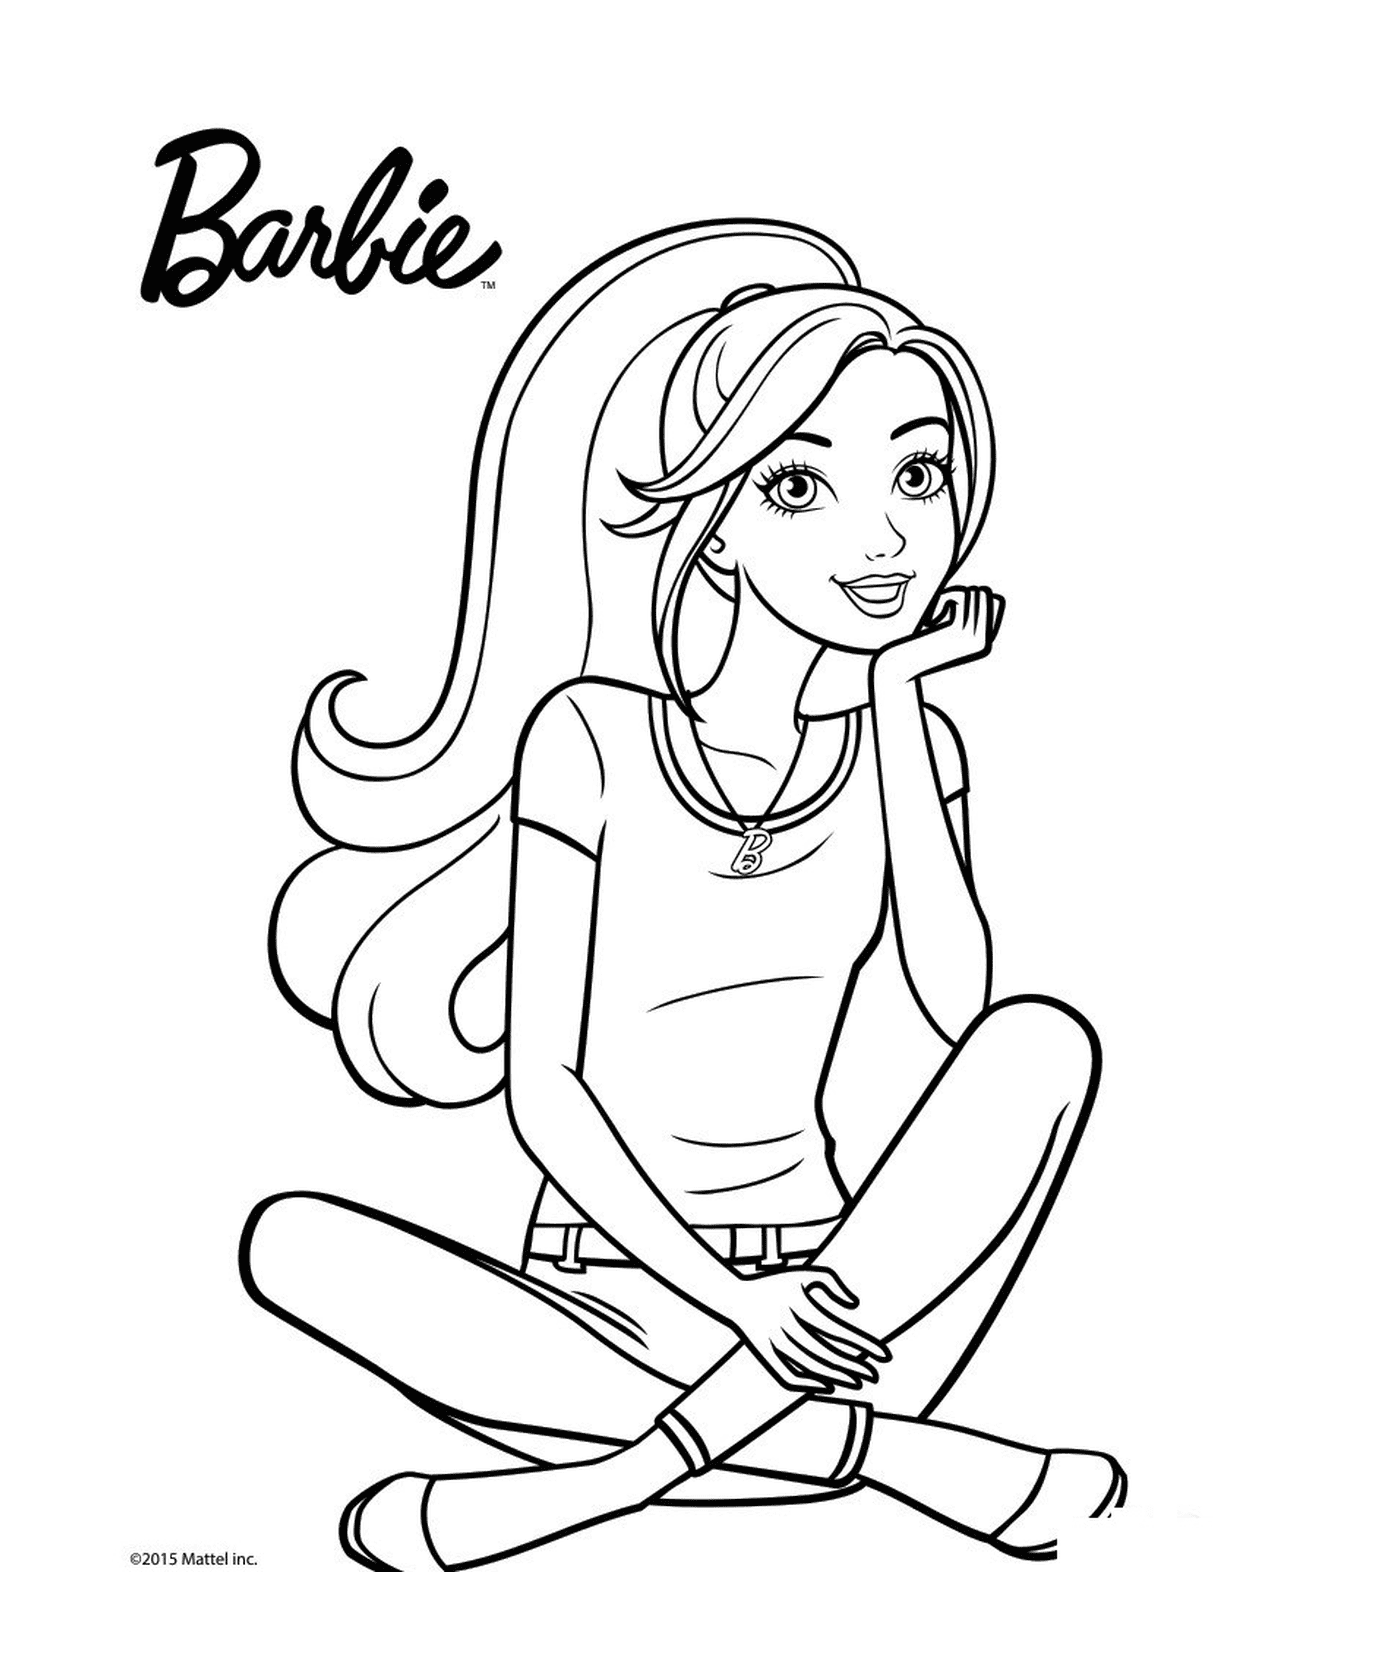  A thinking and happy Barbie doll 